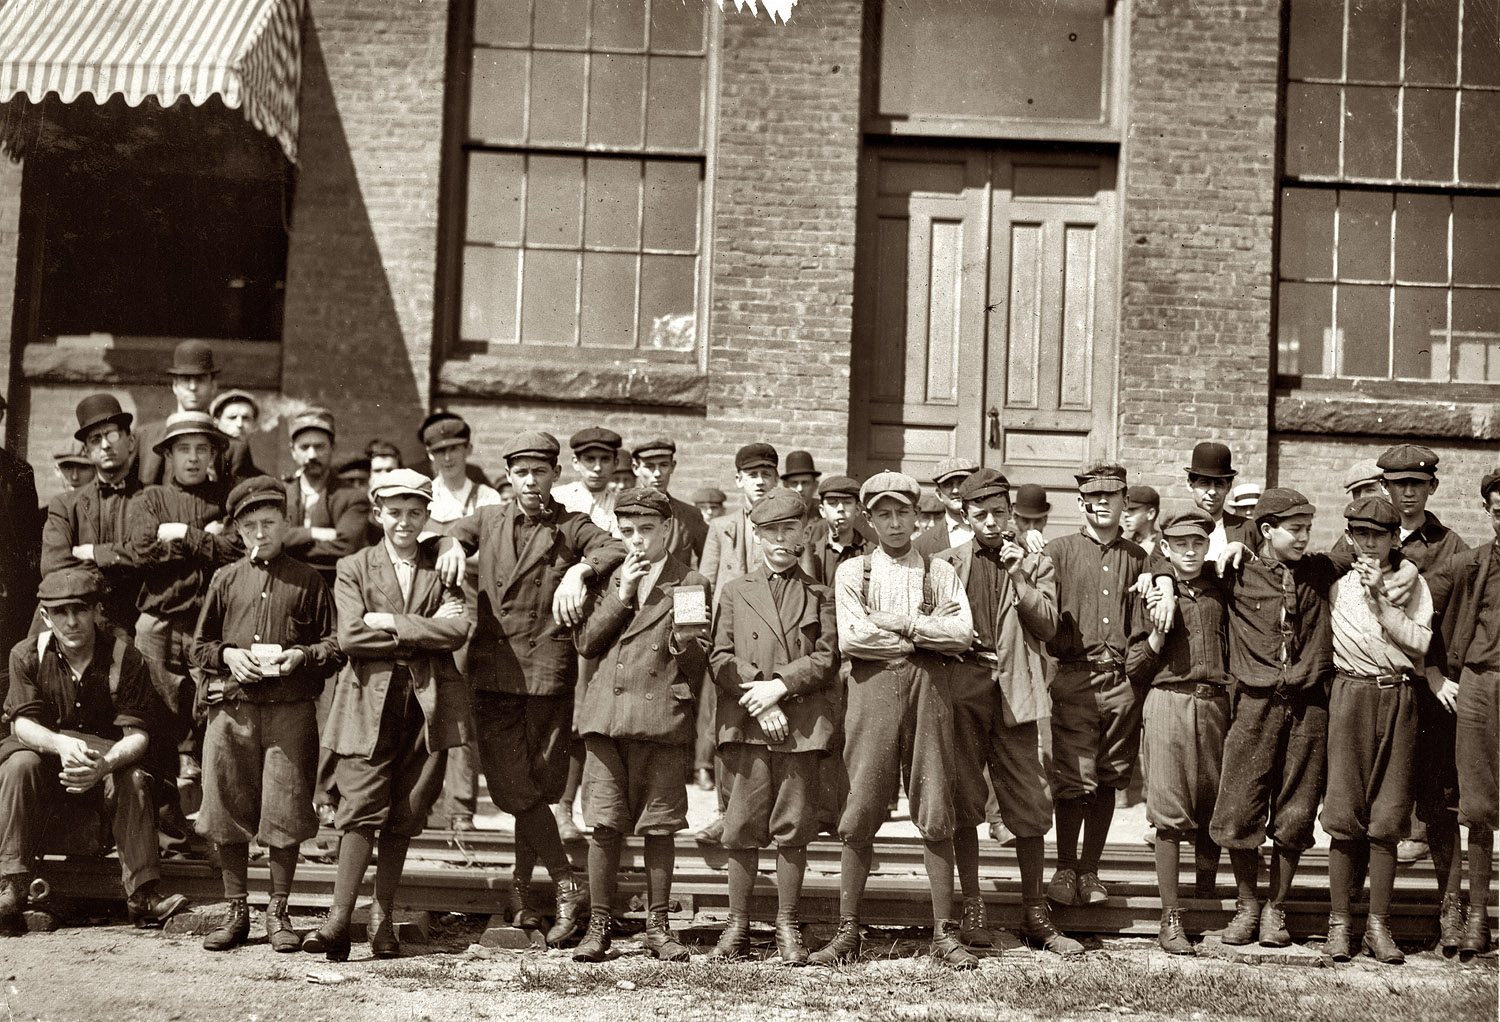 Group in front of Indian Orchard Mfg. Co. Everyone in photo was working there. Boy not photographed: Hector Dubois, 24 Water St., doffer who crushed finger in pump. Indian Orchard, Massachusetts. September 1911. View full size.